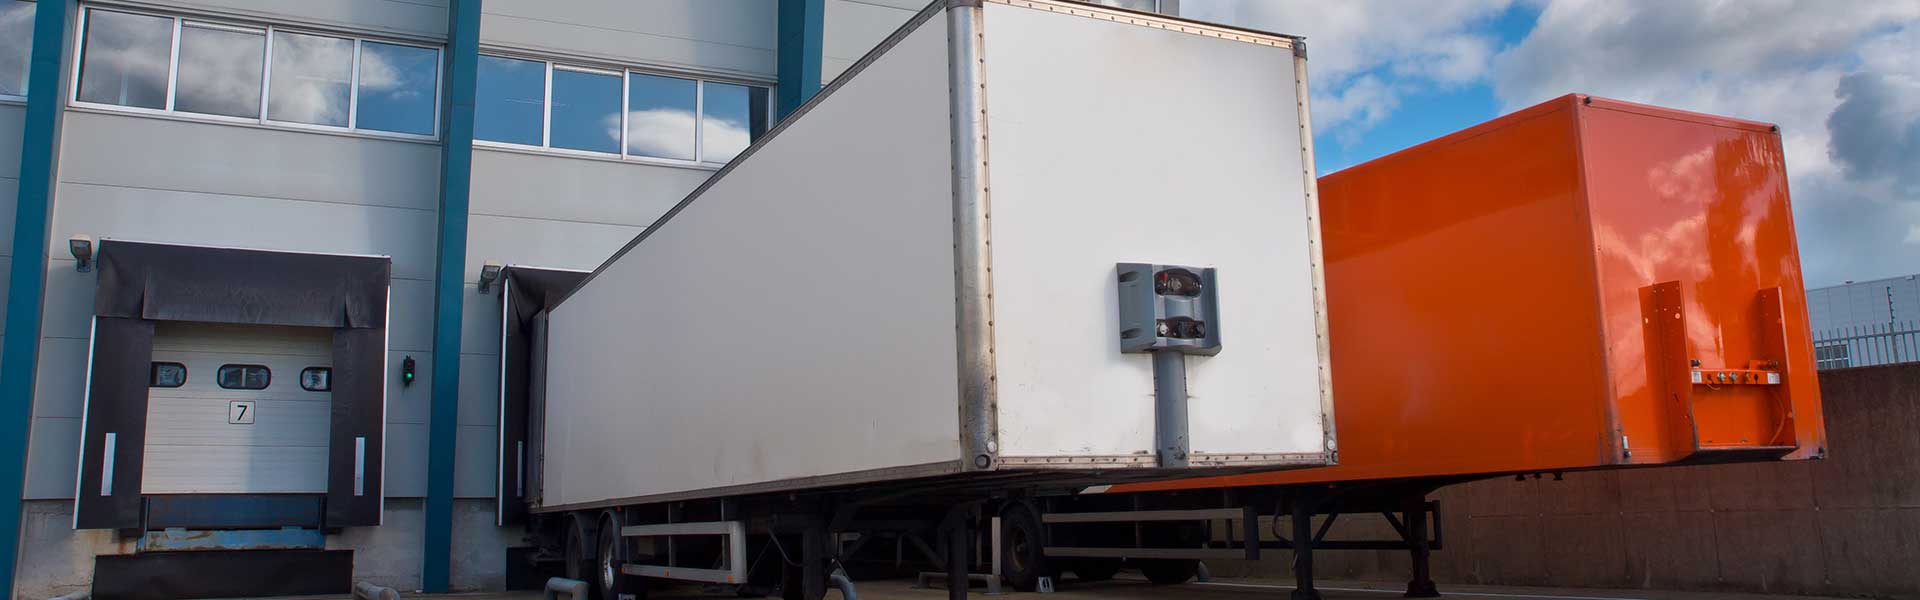 ELEGANT Logistics - Refrigerated Freight (Containers)